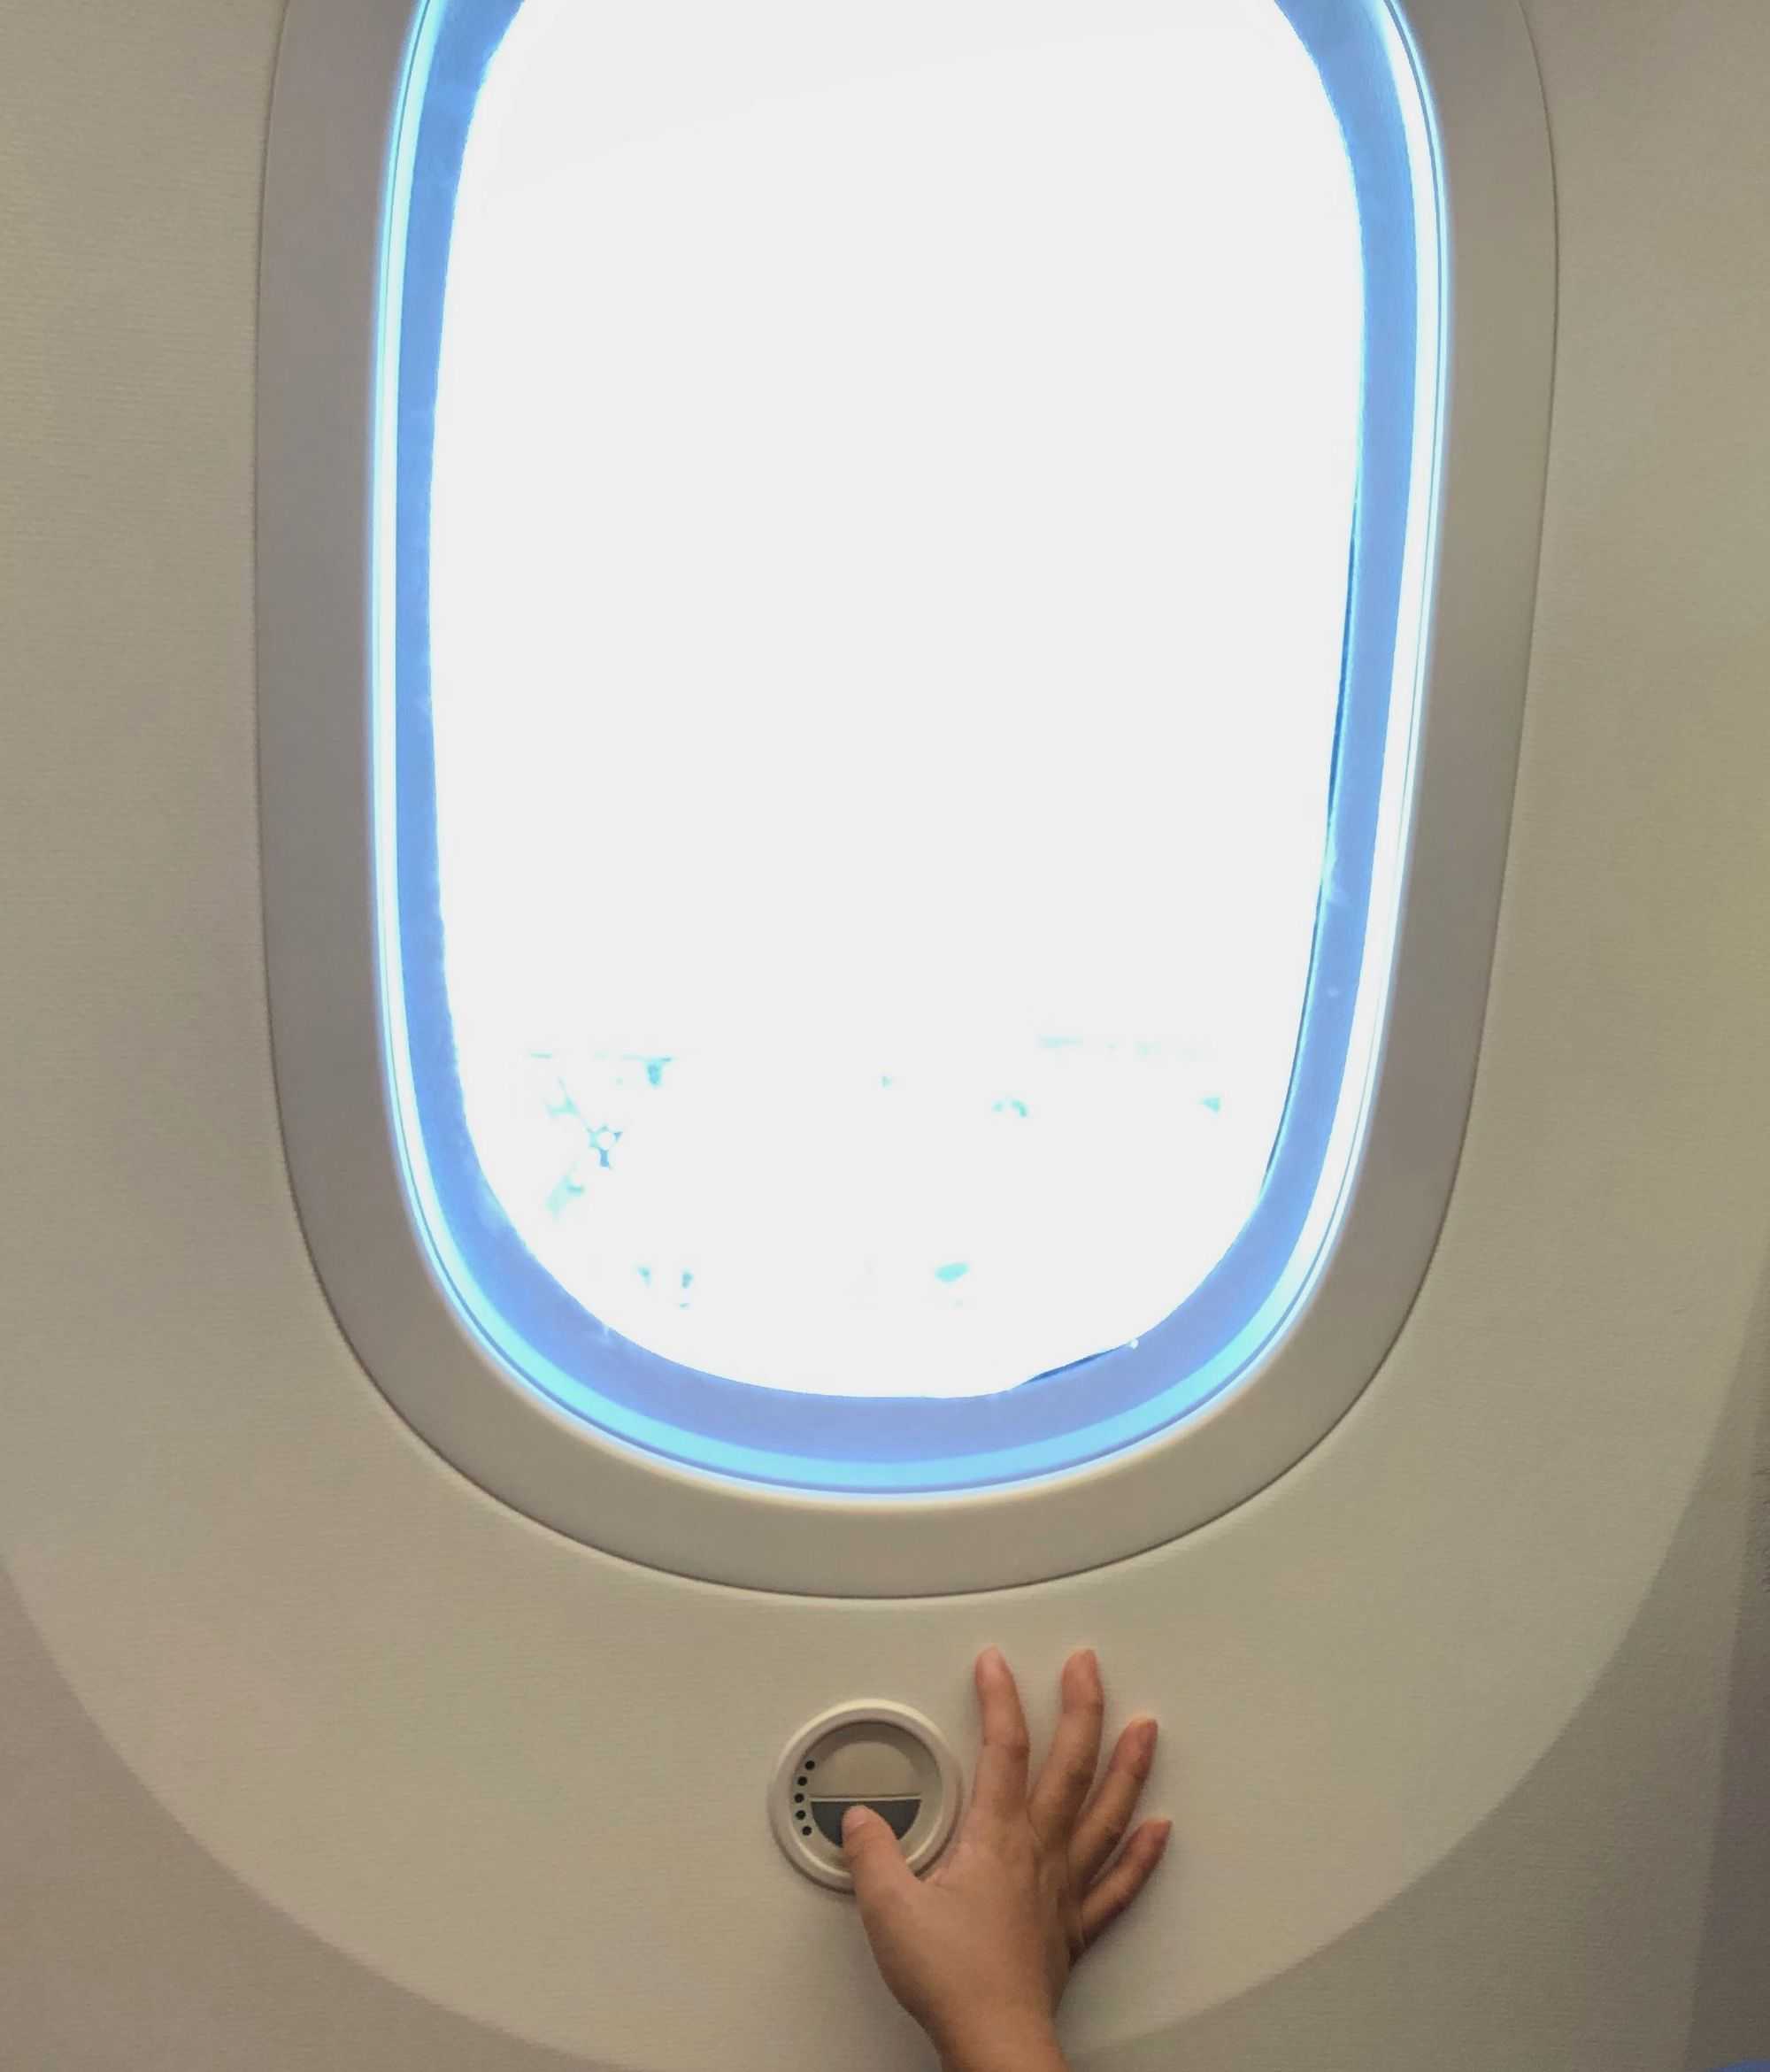 High tech window shade (Image by author)